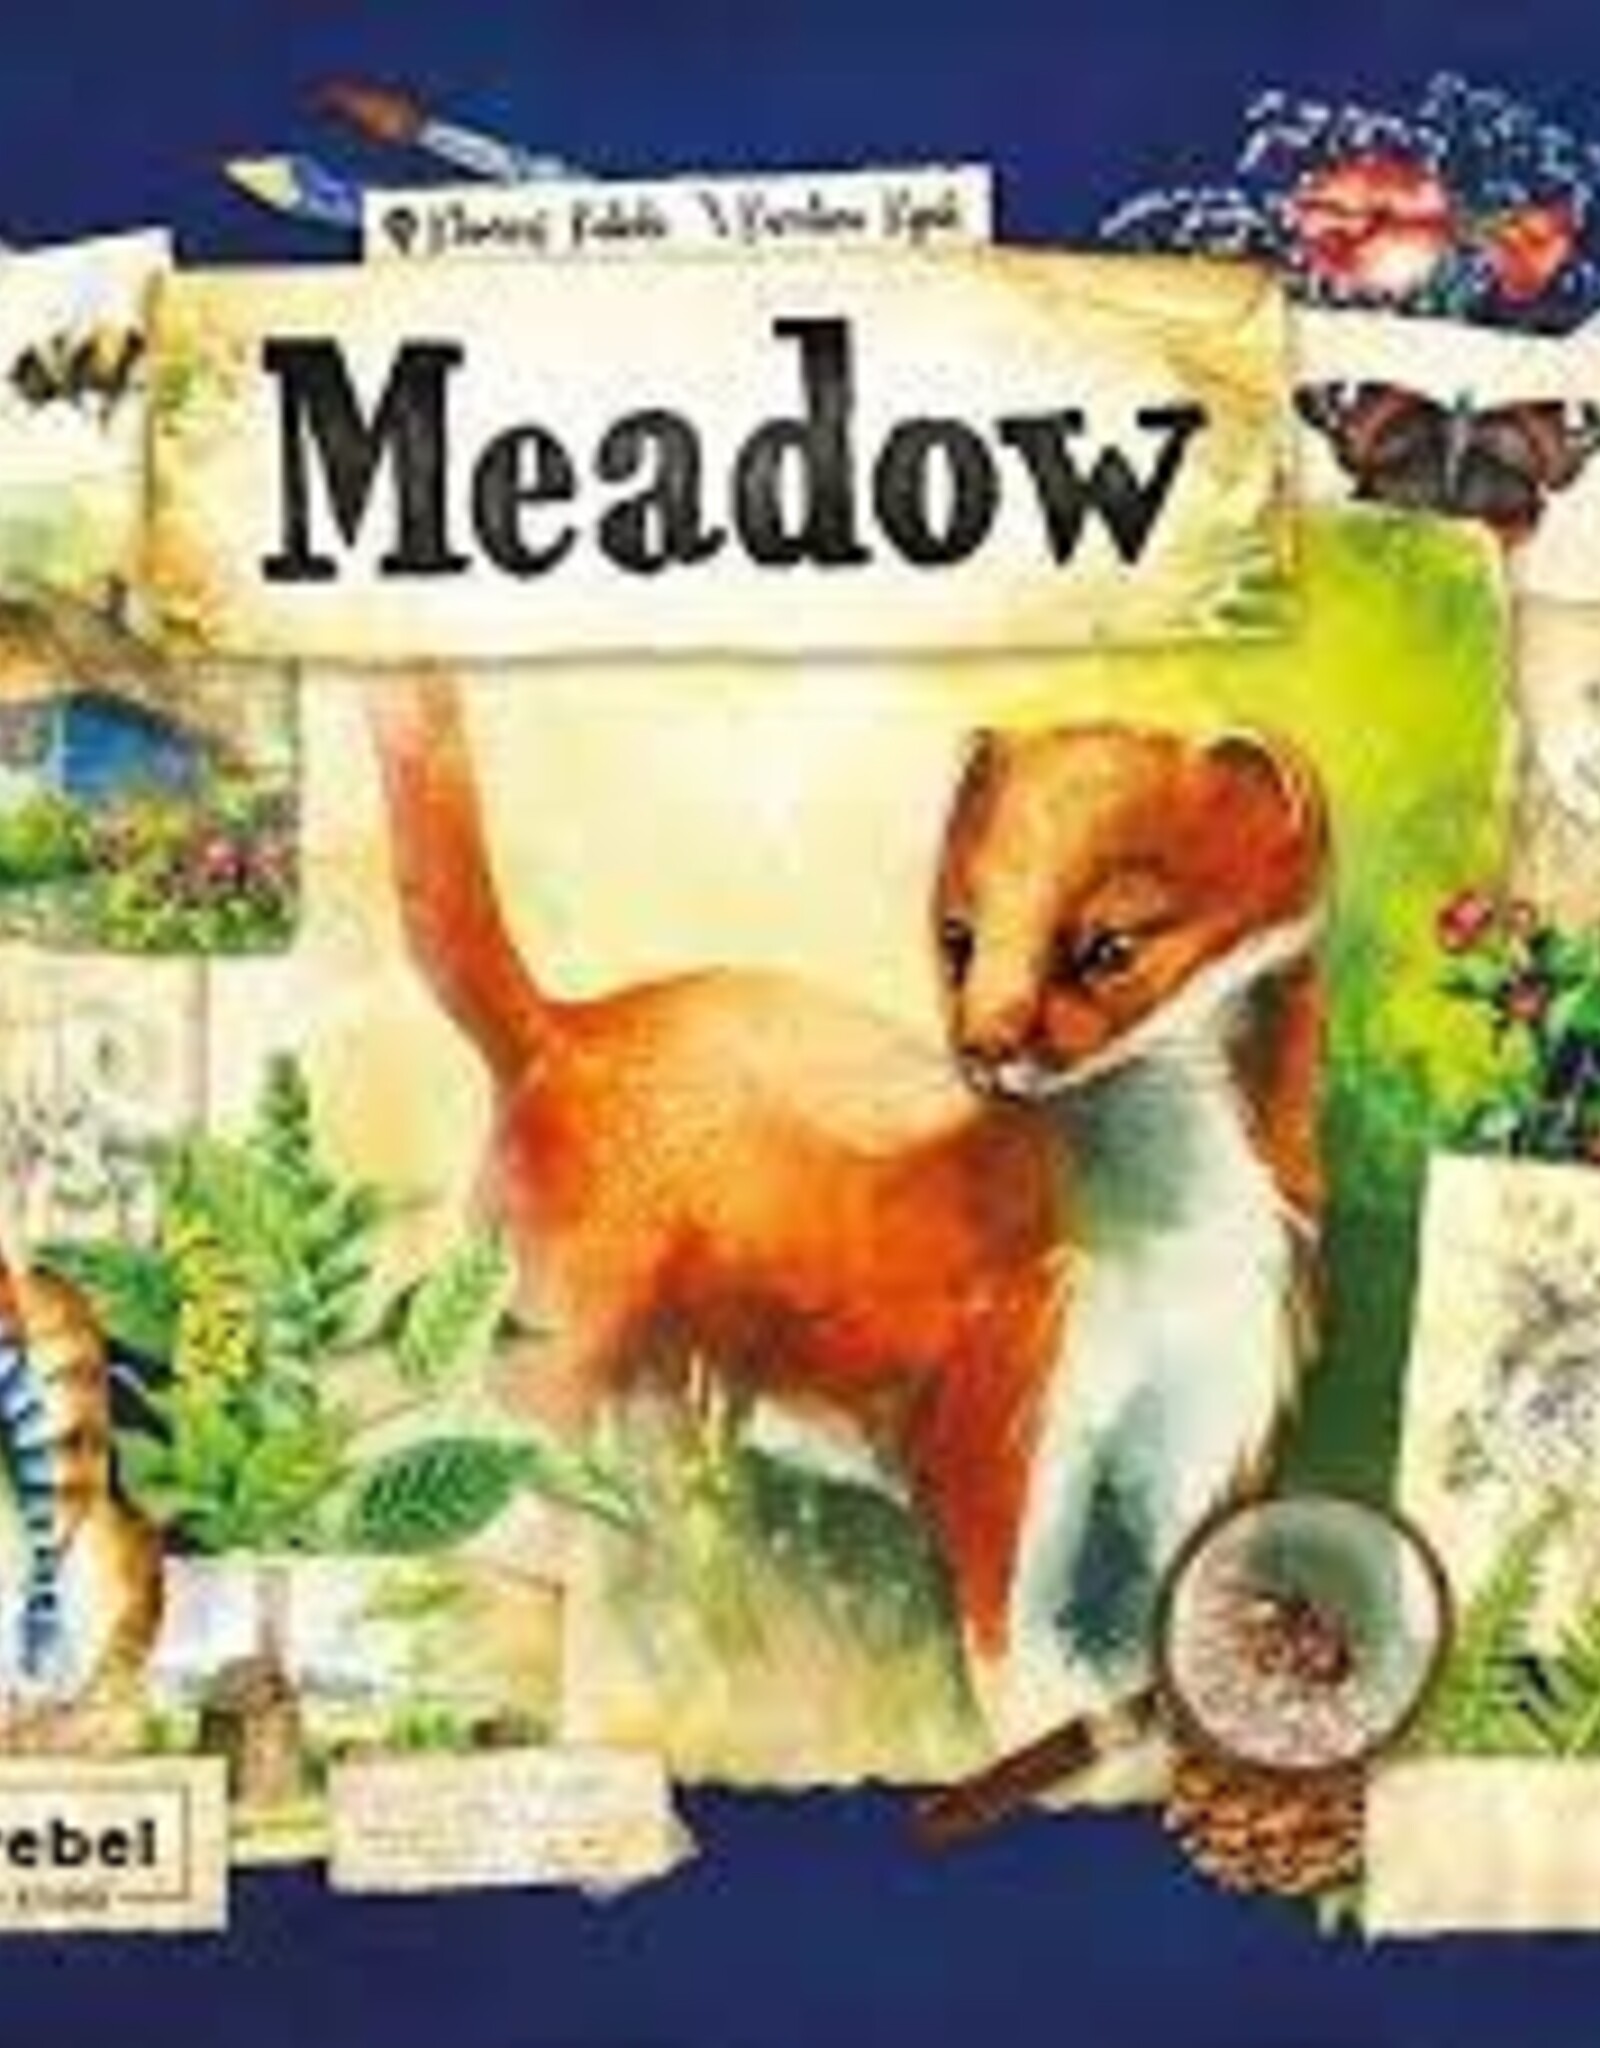 ACD TOYS GAMES MEADOW